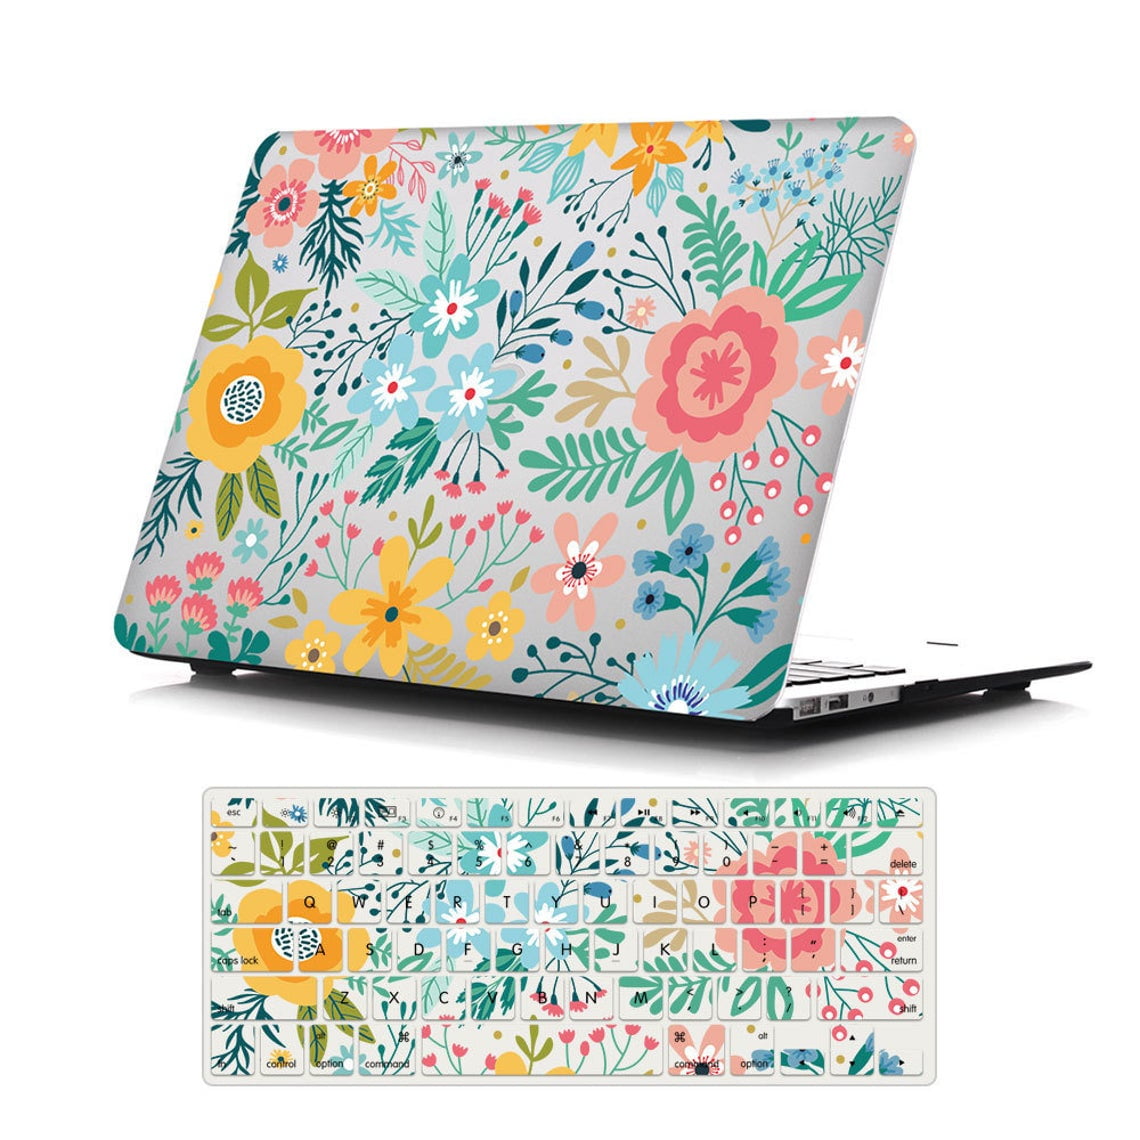 Floral Pattern with Funky Flowers A1932, 2019 2018 Release Compatible with MacBook Air 13 inch Hard Plastic Shell Cover Case 